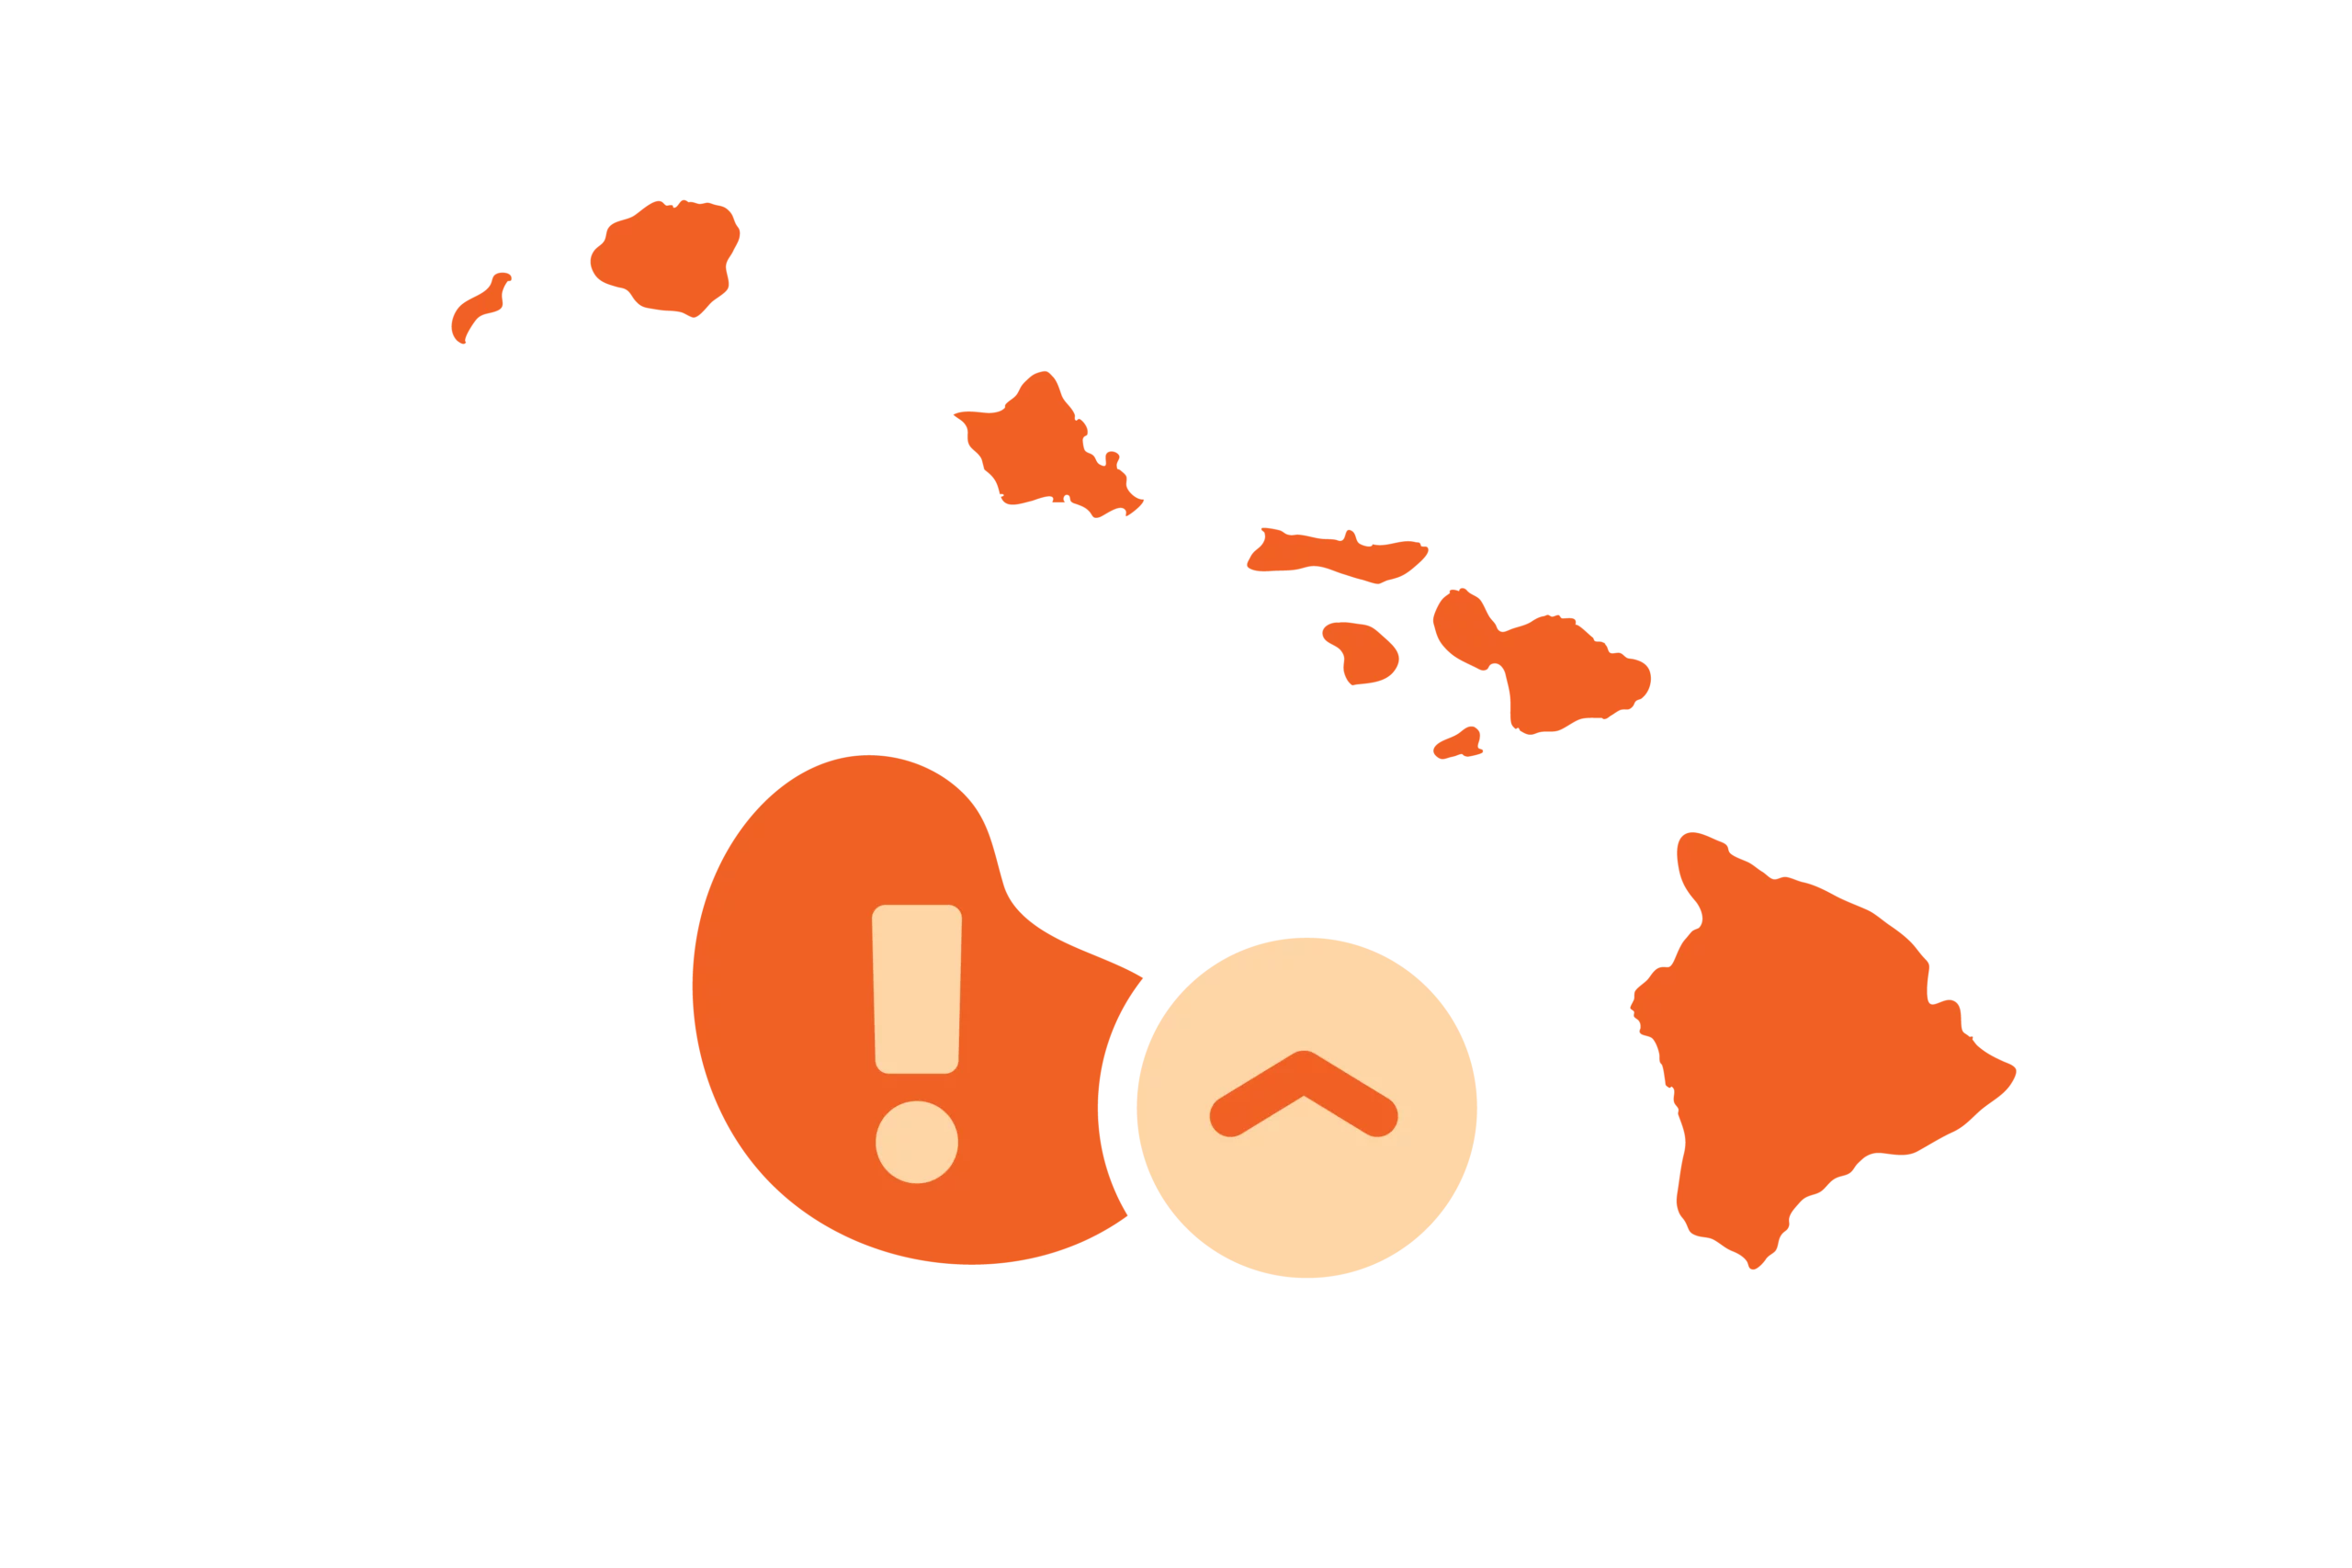 Illustration of the Hawaiian islands with an exclamation mark and arrow pointing upward.